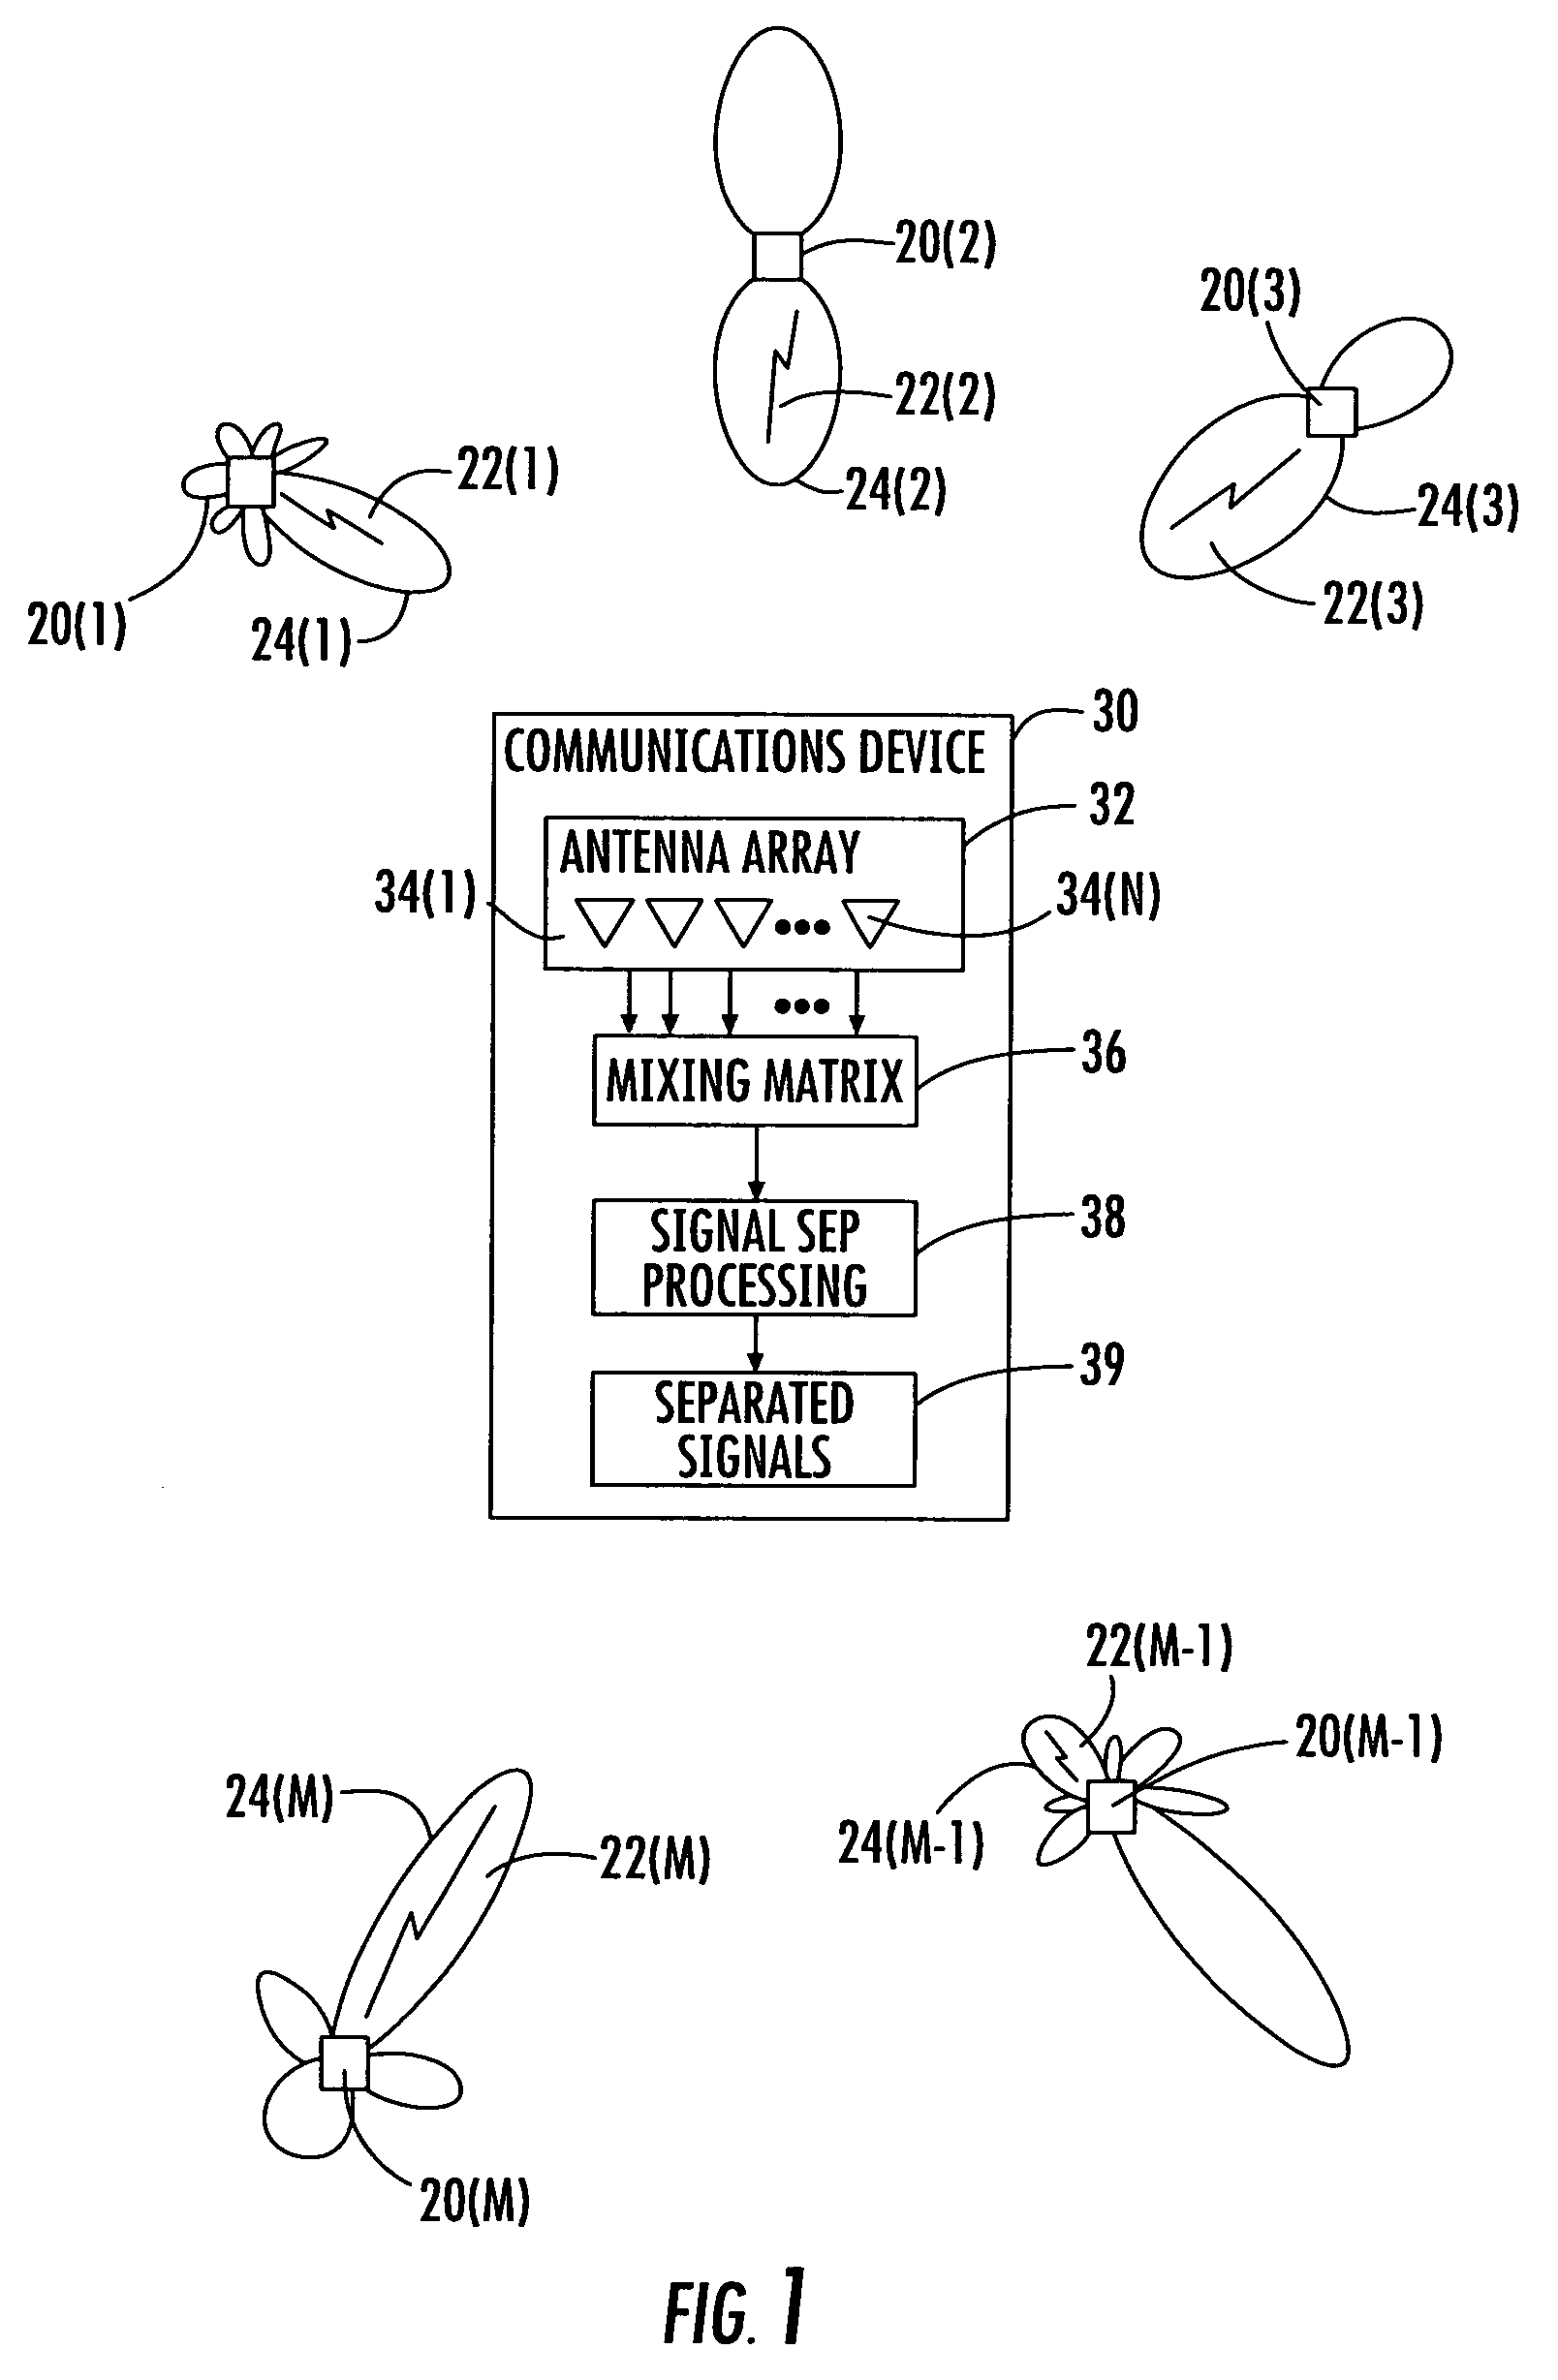 Signal separation using rank deficient matrices